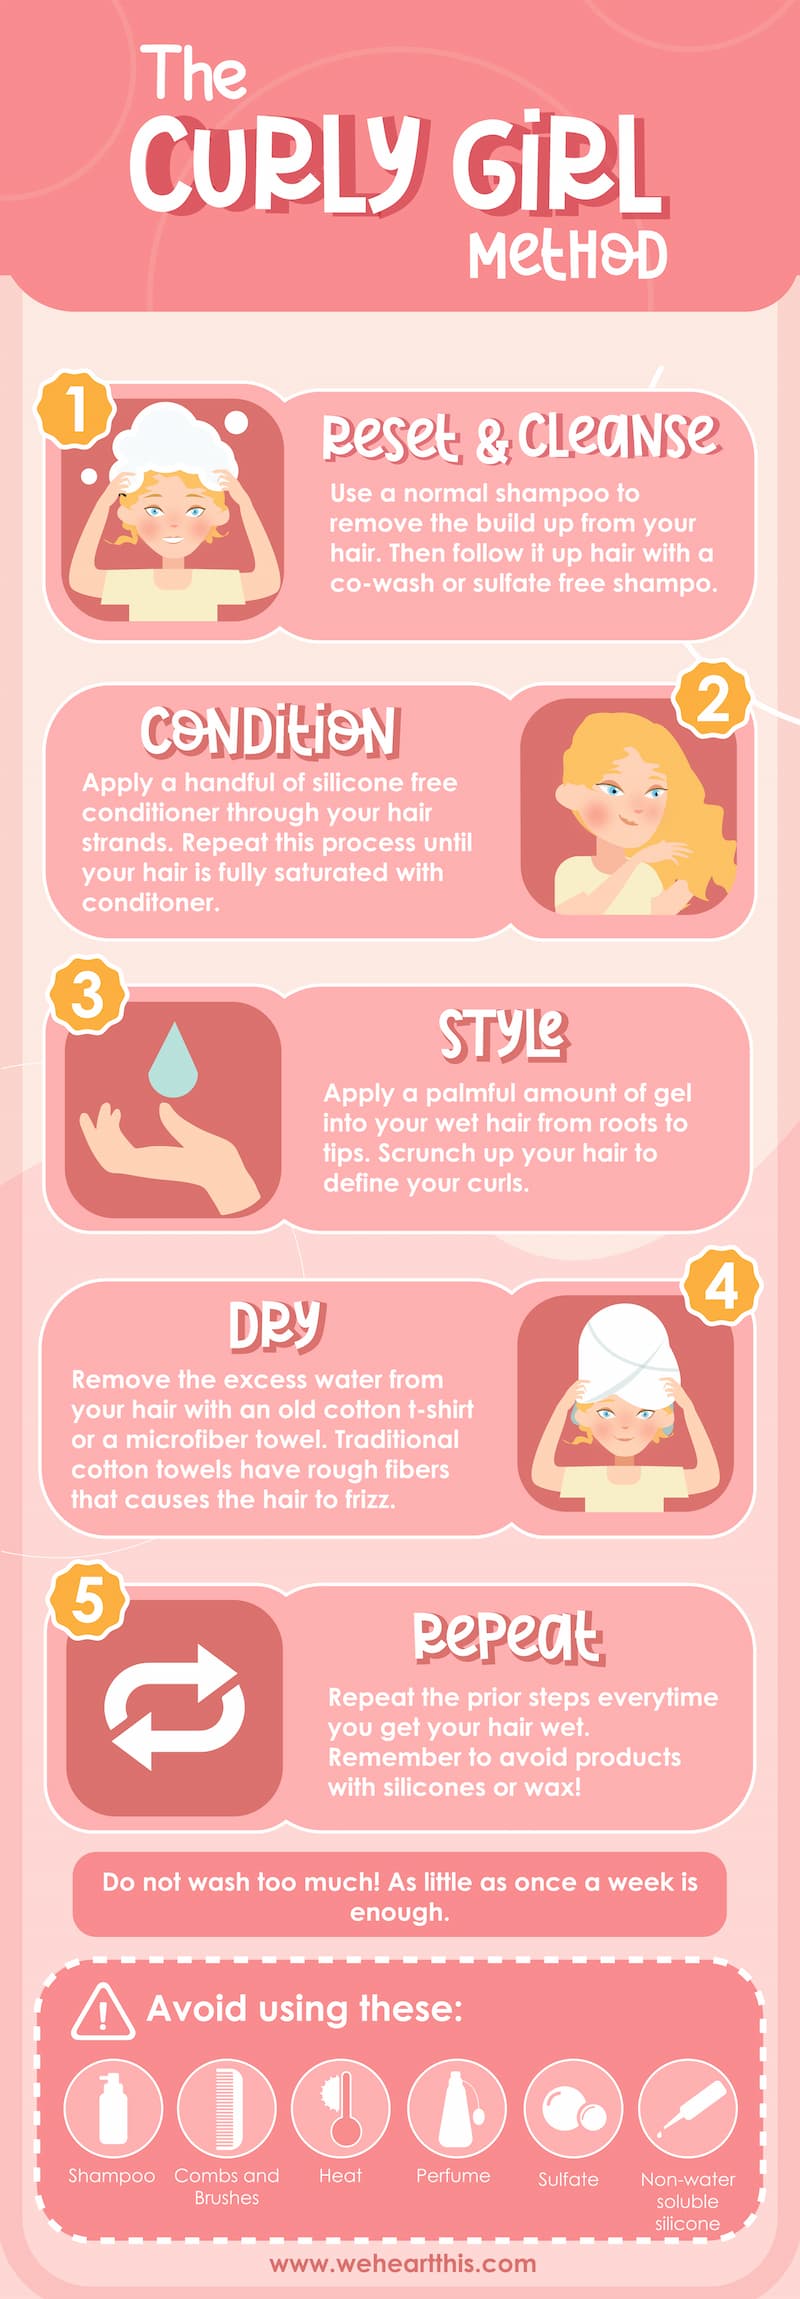 pink infographic with illustrations of a blonde woman depicting the steps in the curly girl method